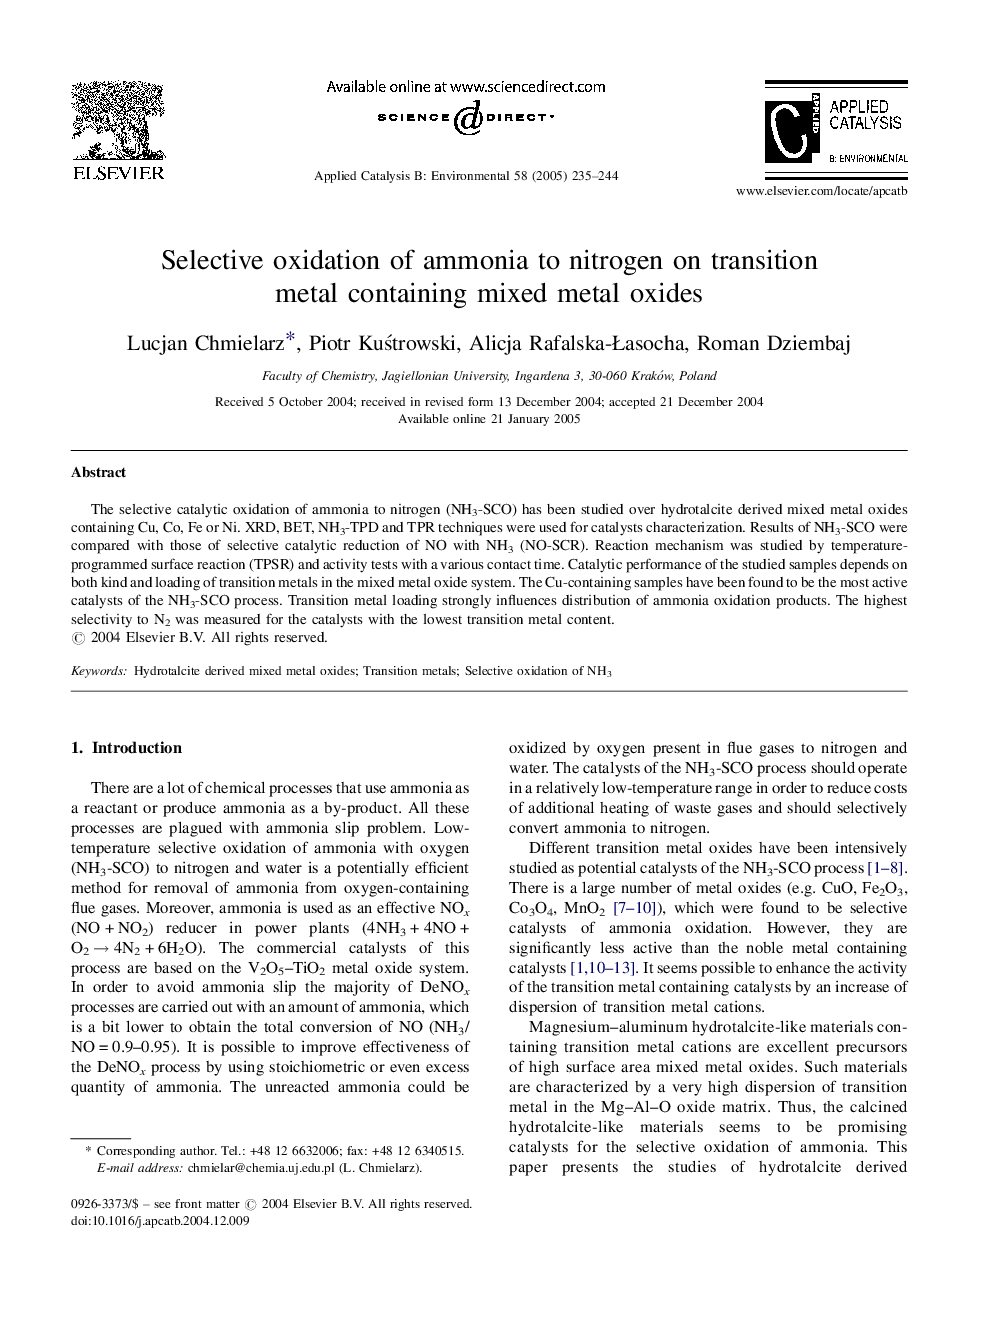 Selective oxidation of ammonia to nitrogen on transition metal containing mixed metal oxides